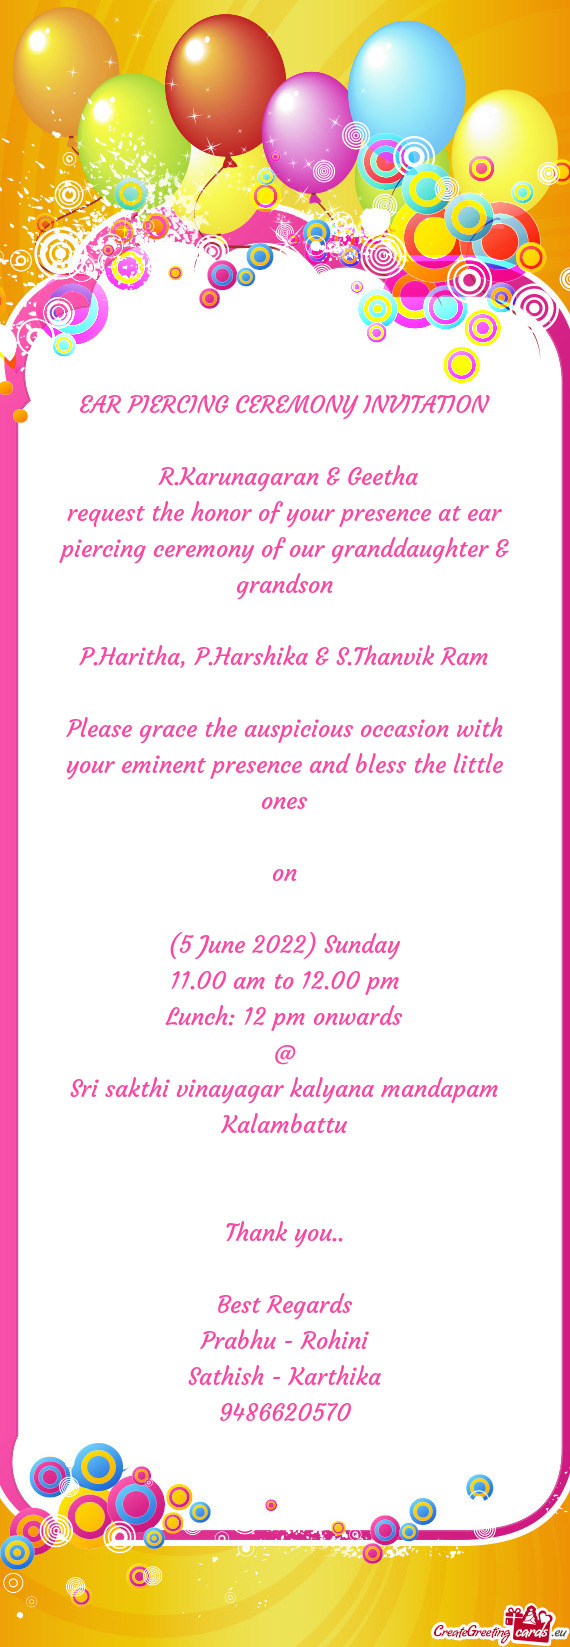 Request the honor of your presence at ear piercing ceremony of our granddaughter & grandson